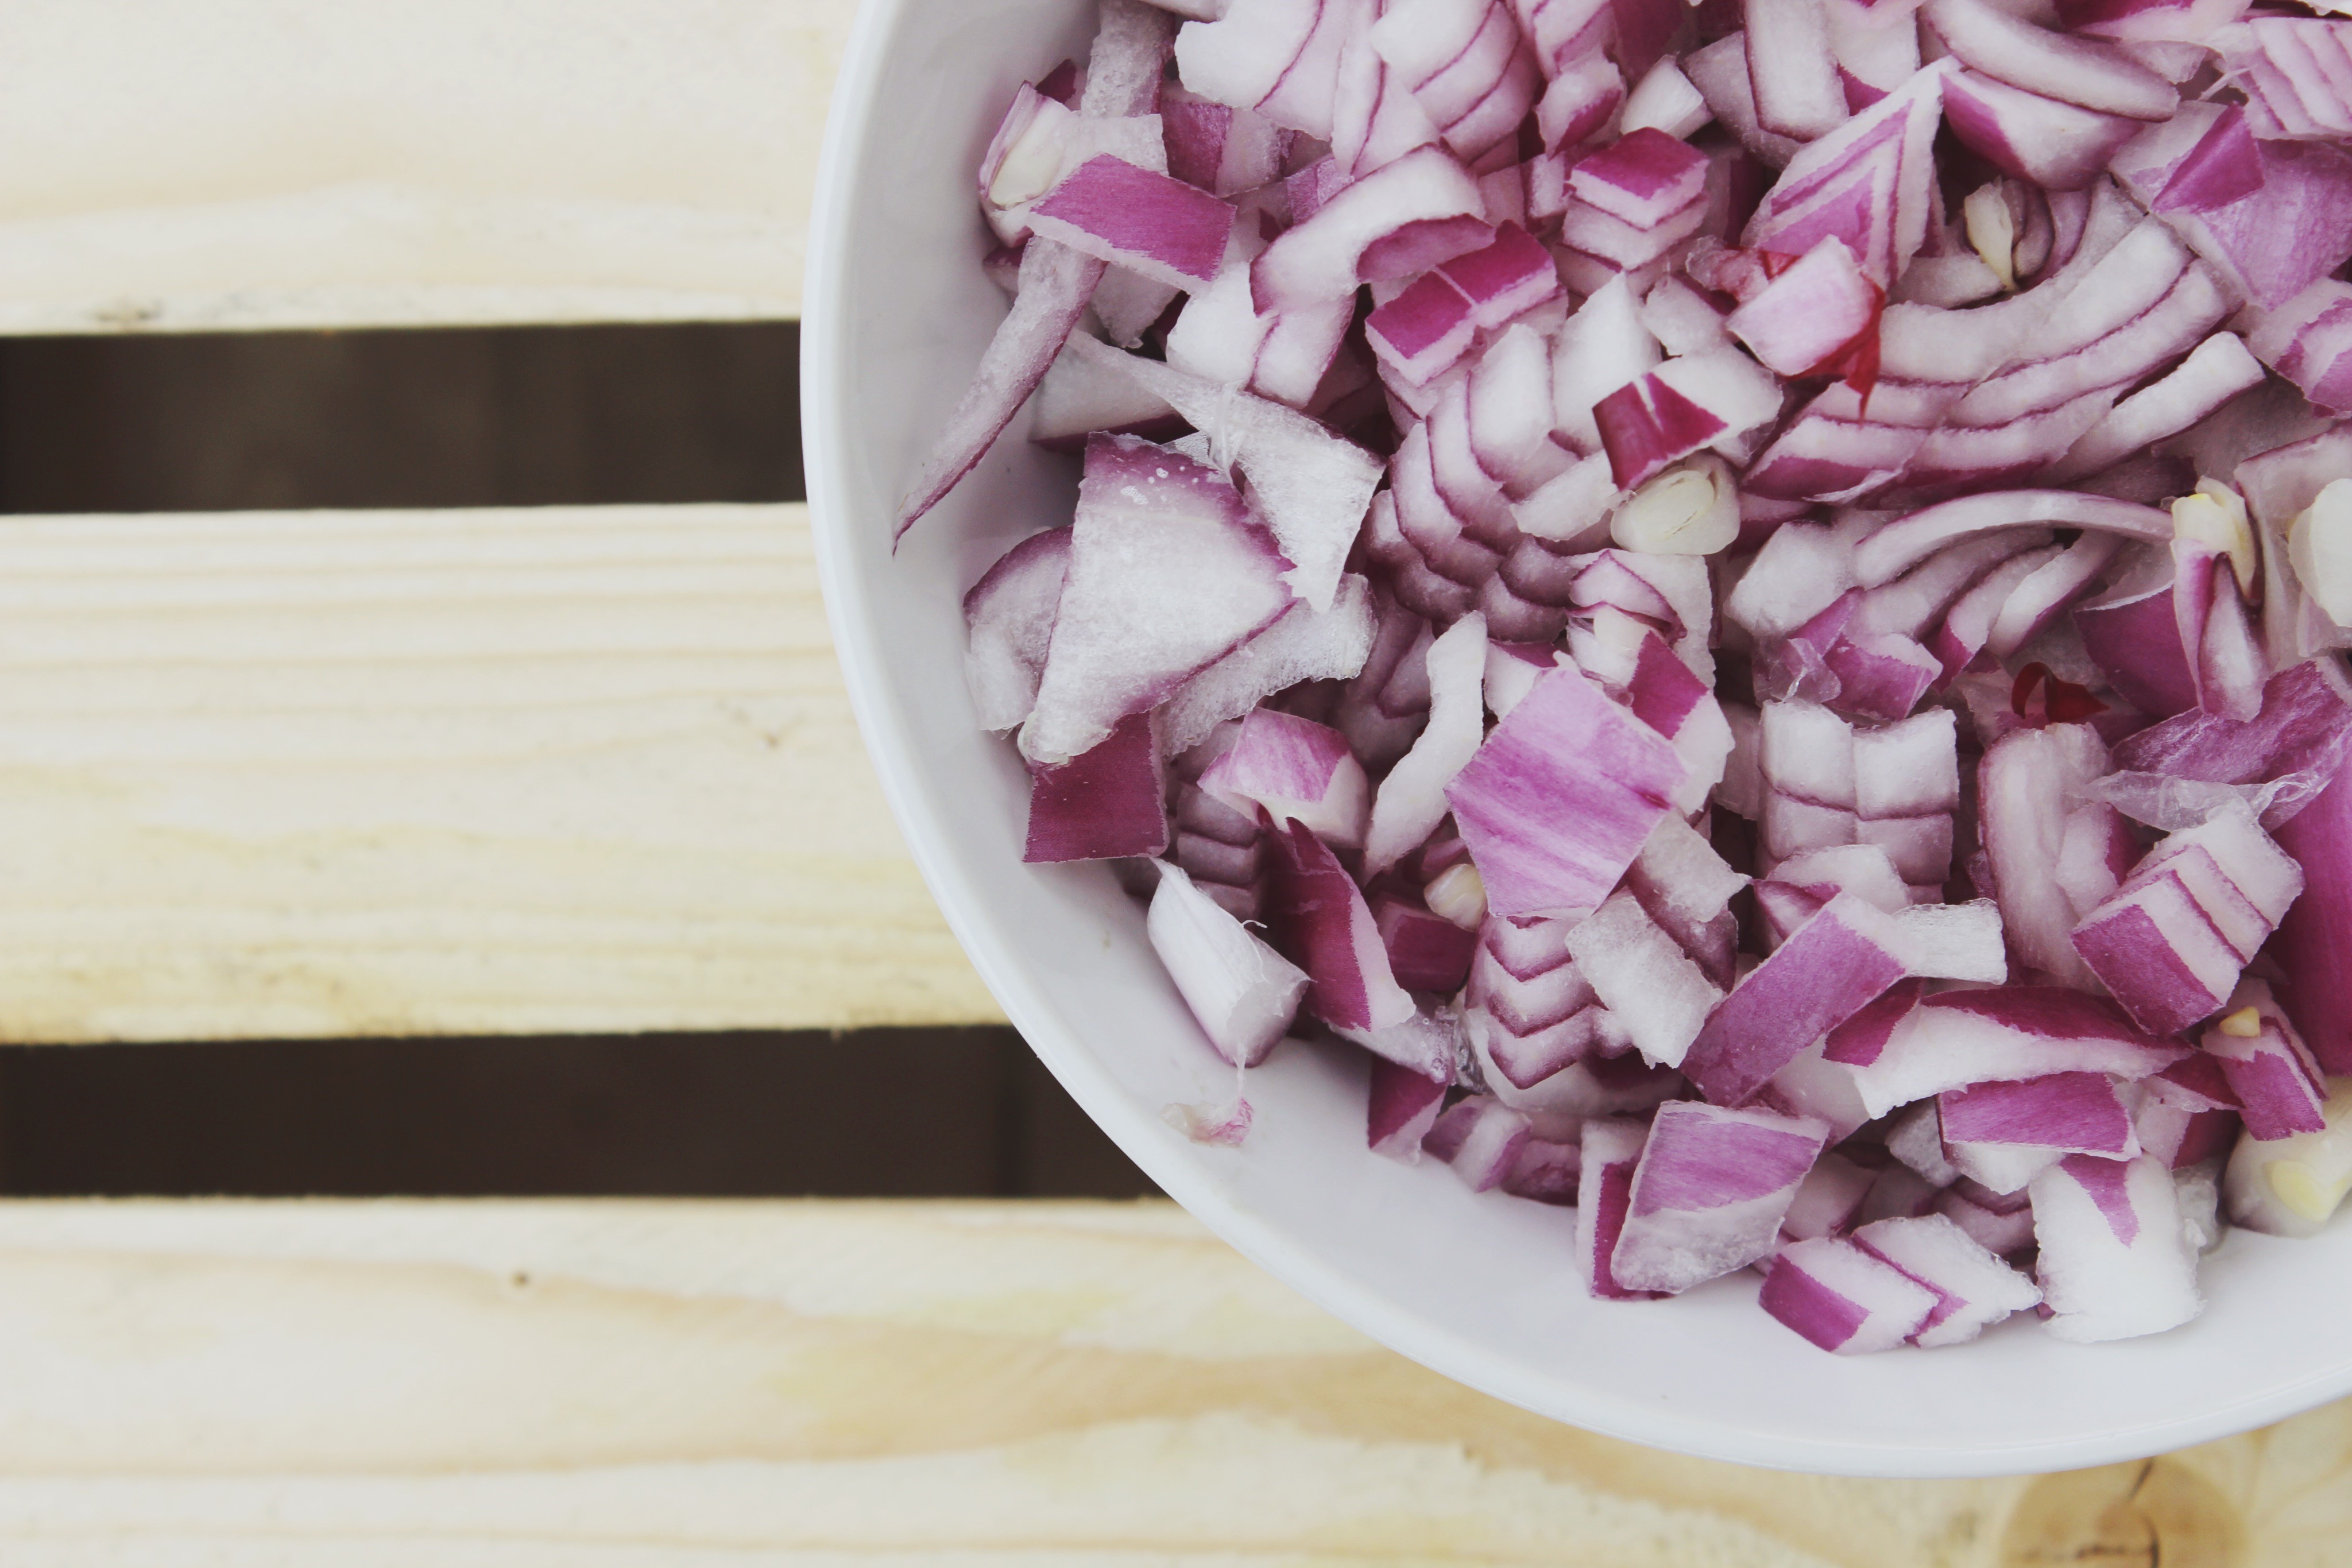 How To: The EASY Way to Chop Onions